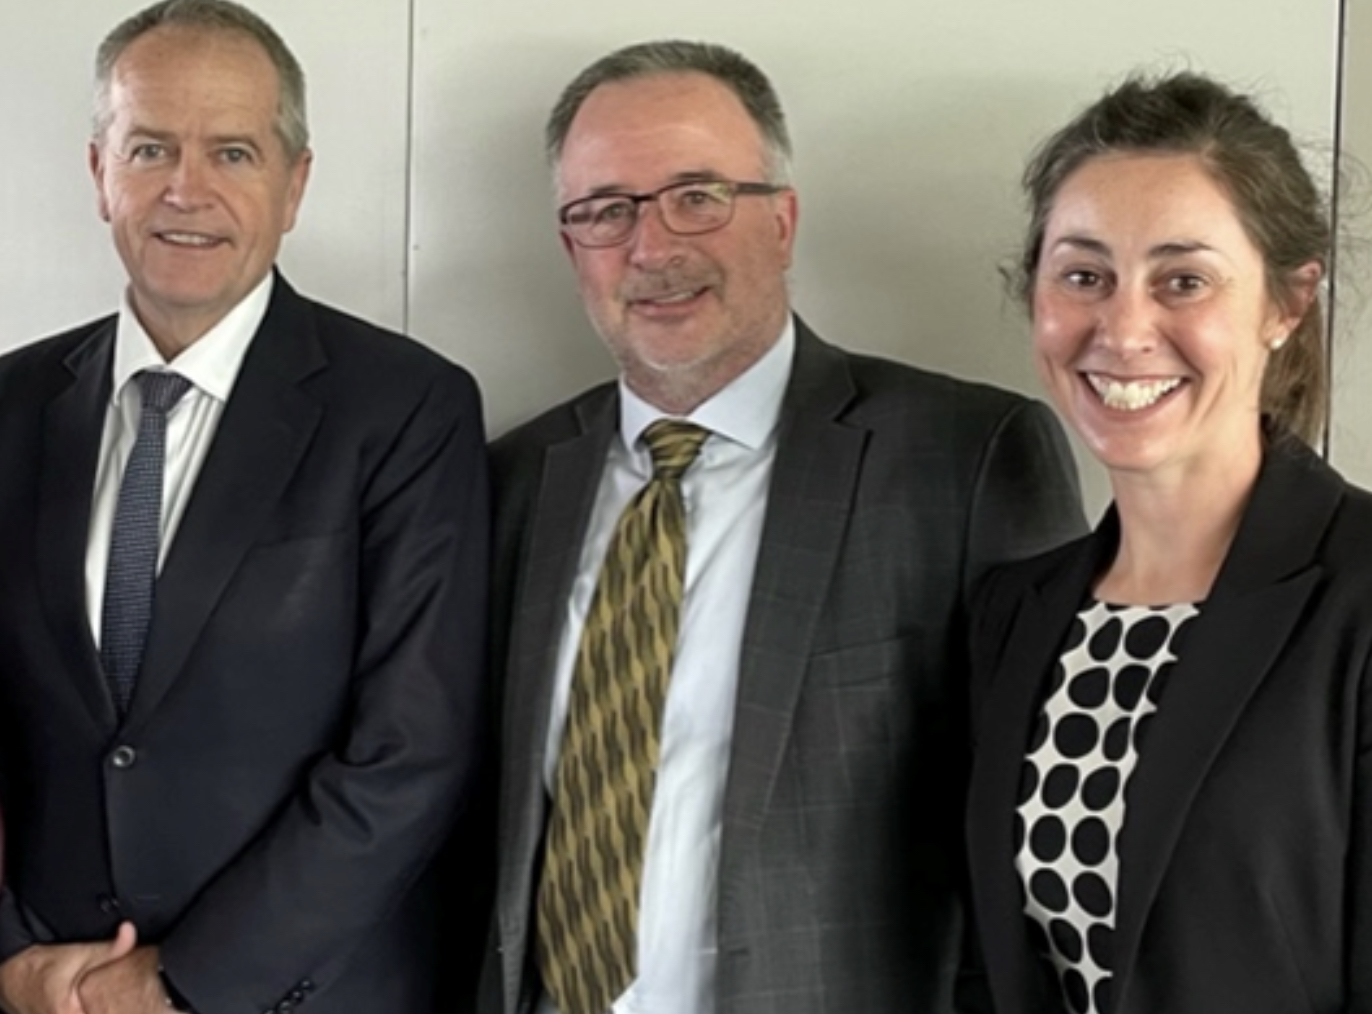 Minister for the NDIS, the Hon. Bill Shorten MP, NDS Tasmania Committee Chair Mark Jessop and NDS State Manager Lizzie Castles.